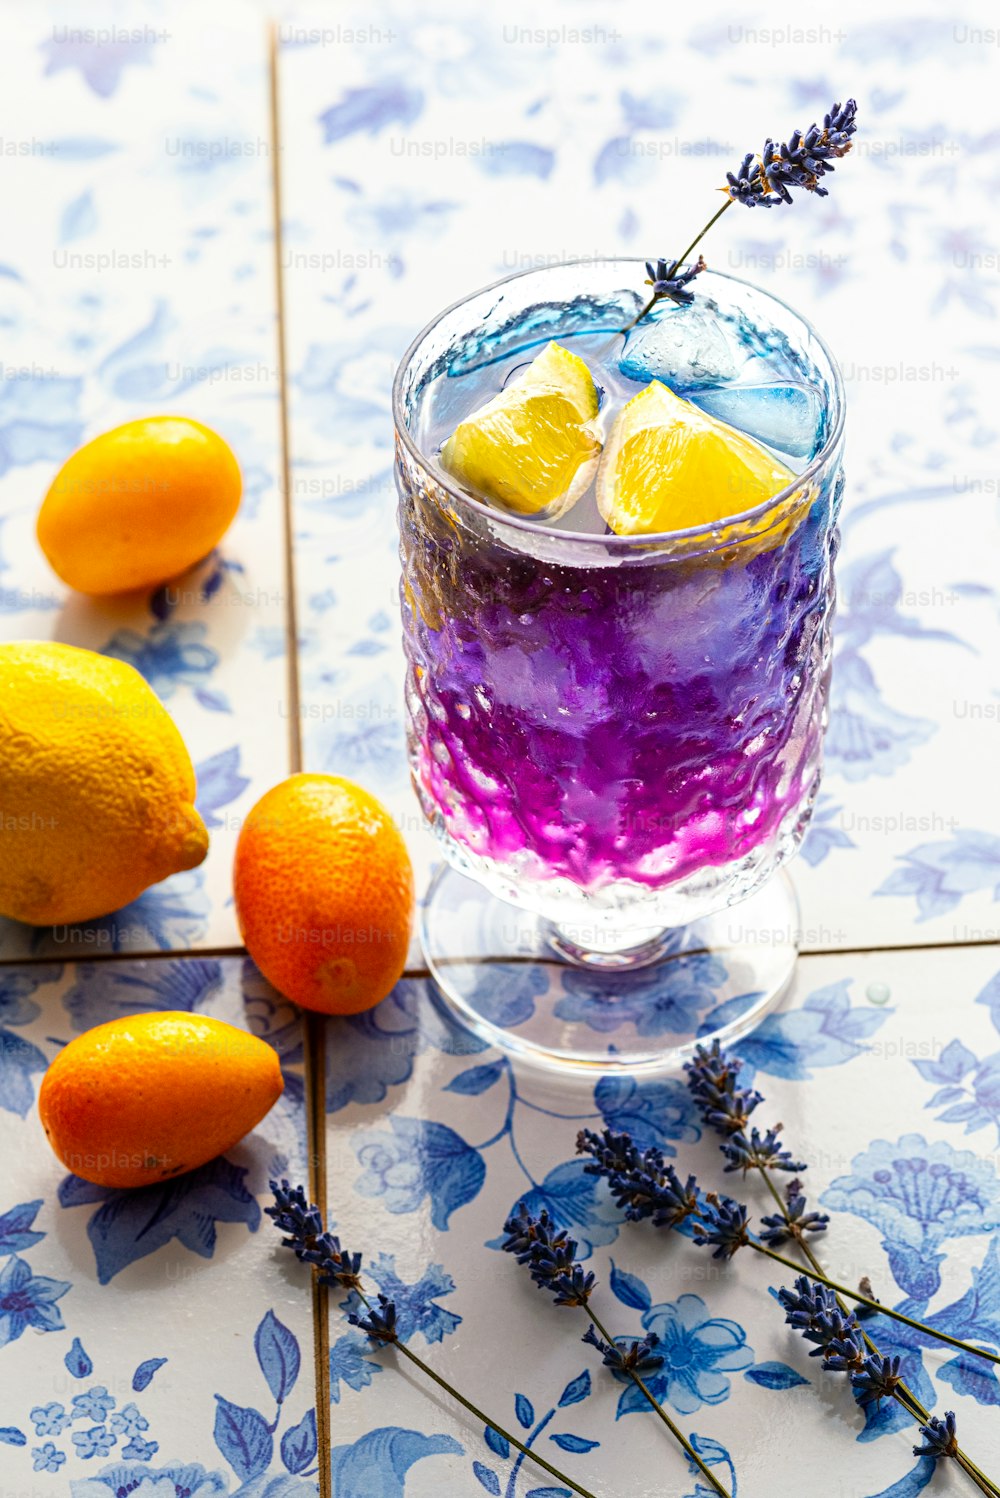 a glass filled with purple liquid next to lemons and lavender